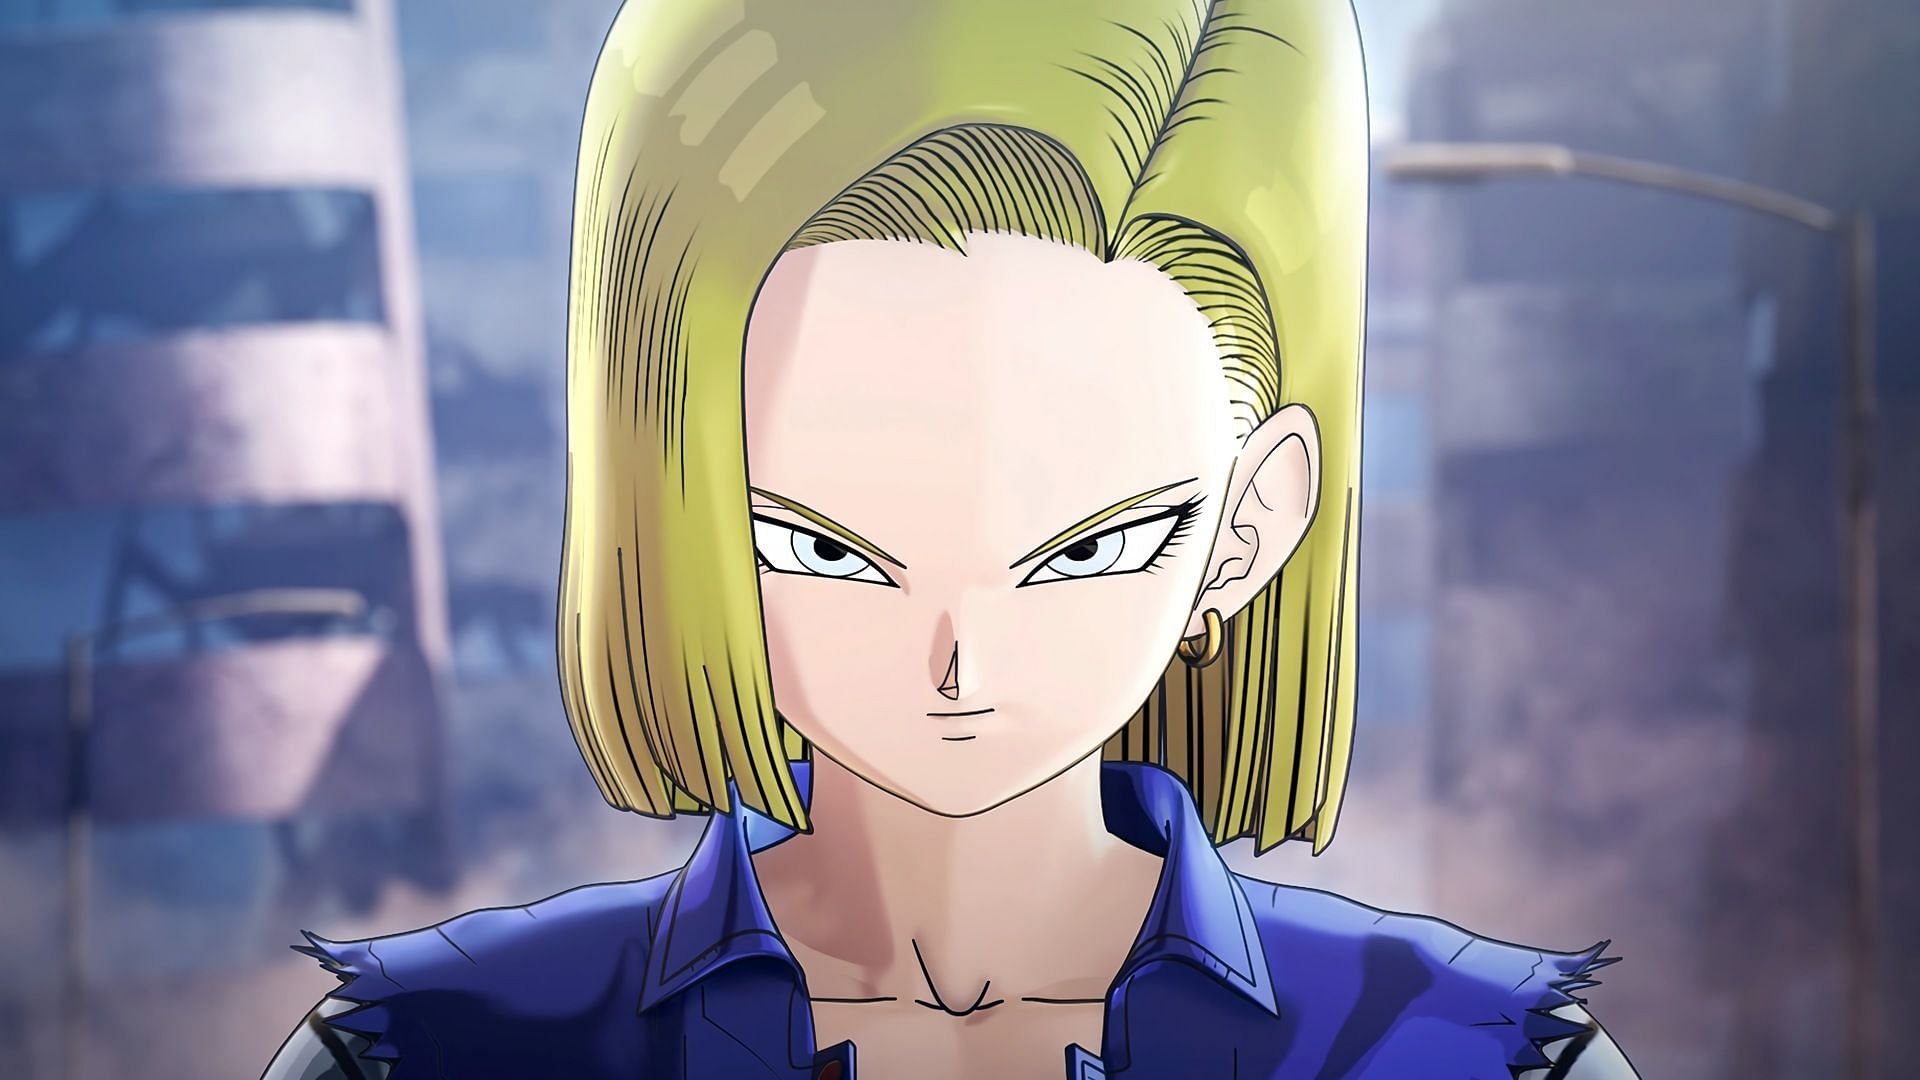 Android 18 as she appears in the Dragon Ball FighterZ game (Image via Arc System Works)